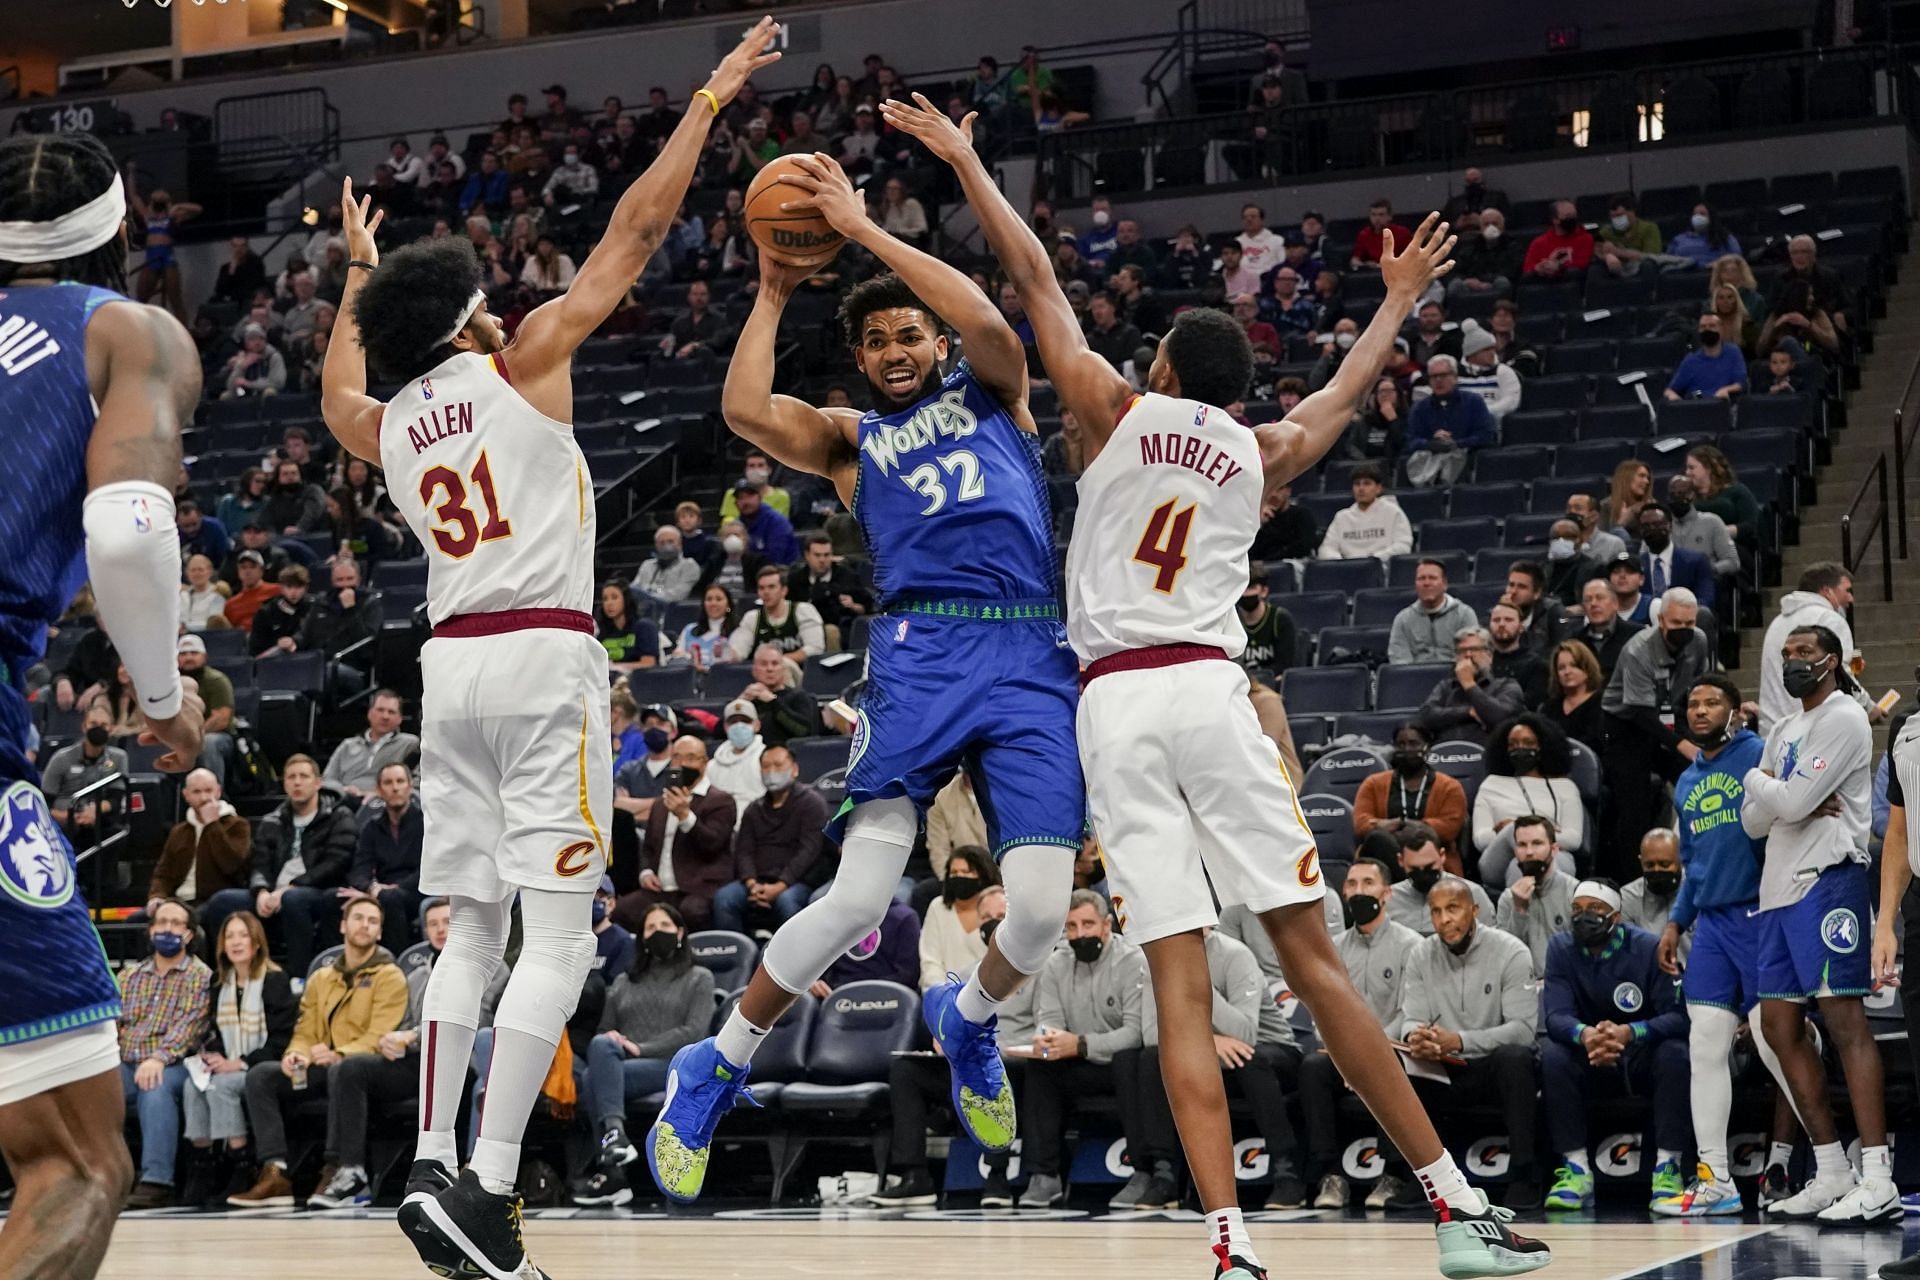 The visiting Minnesota Timberwolves will have a rematch with the Cleveland Cavaliers on Monday. [Photo: Star Tribune]